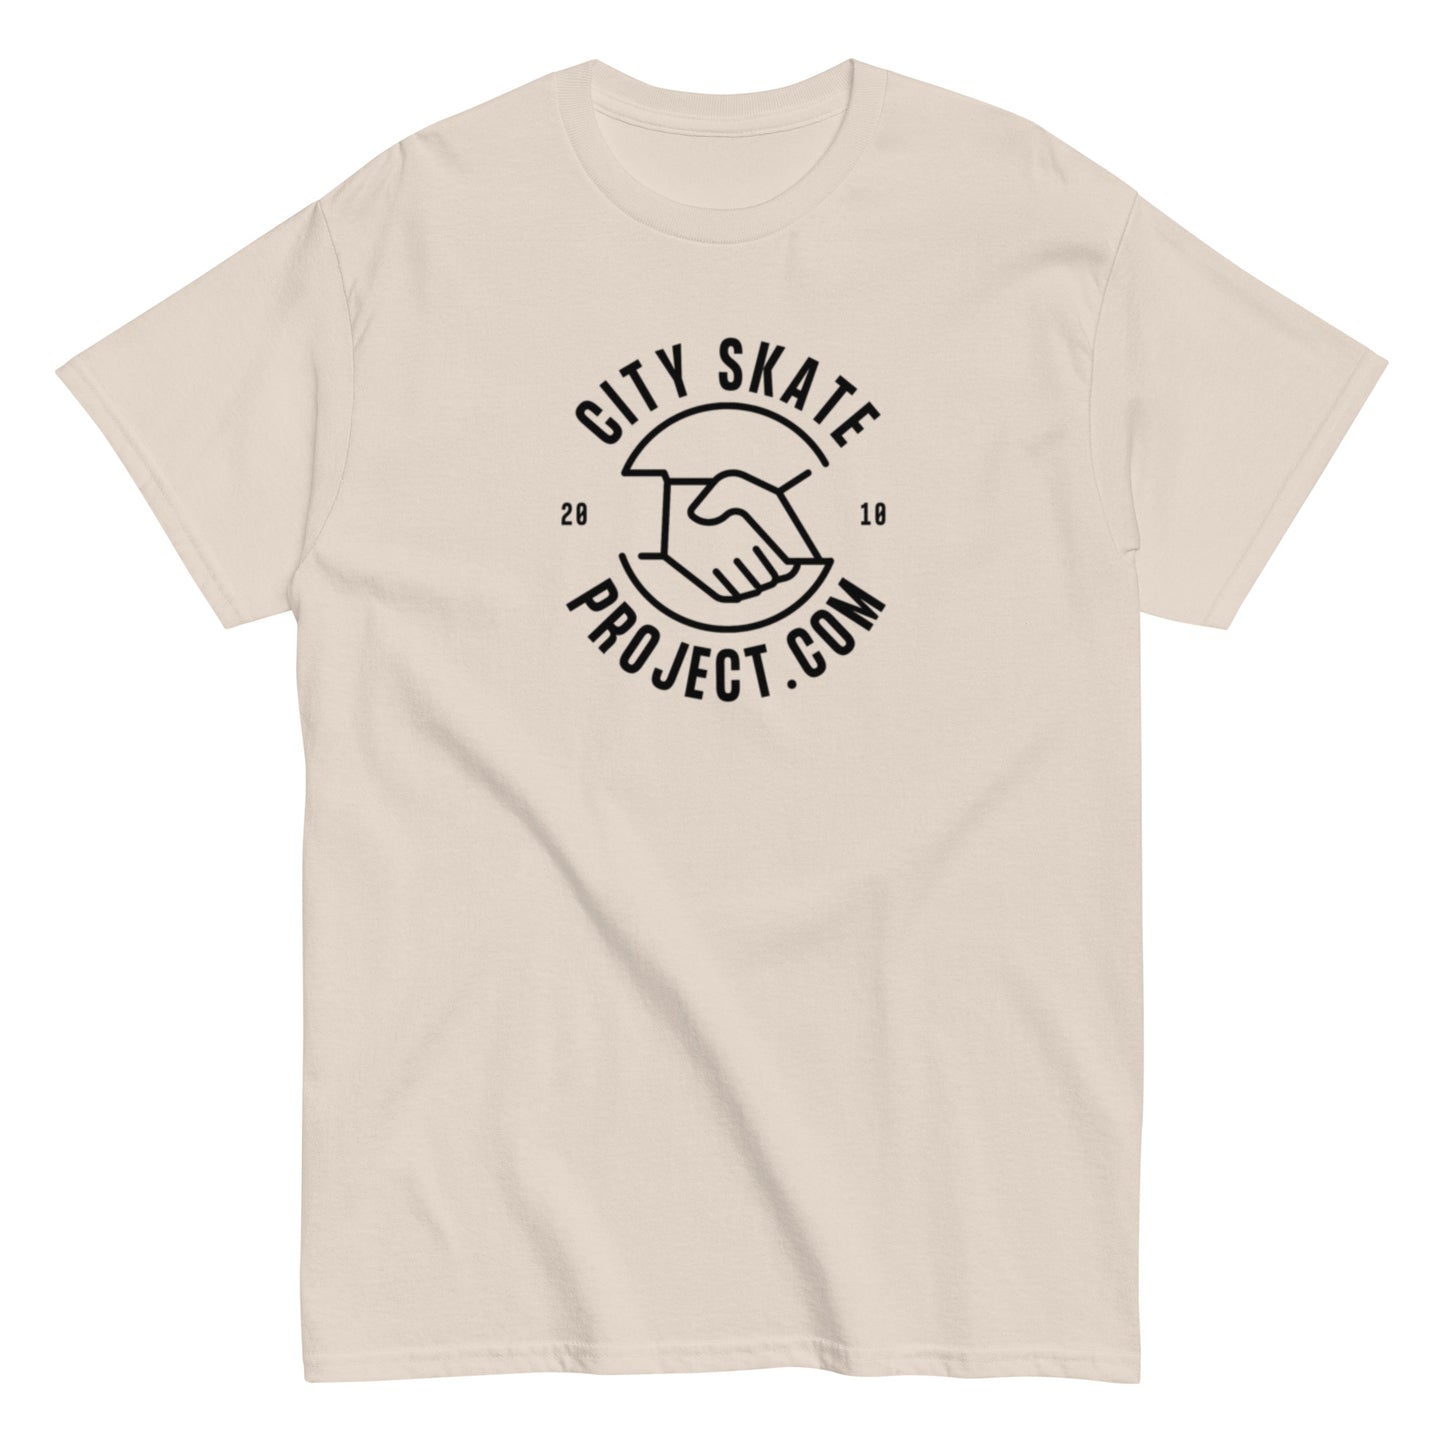 City Skate Project "Well Done" Men's classic tee